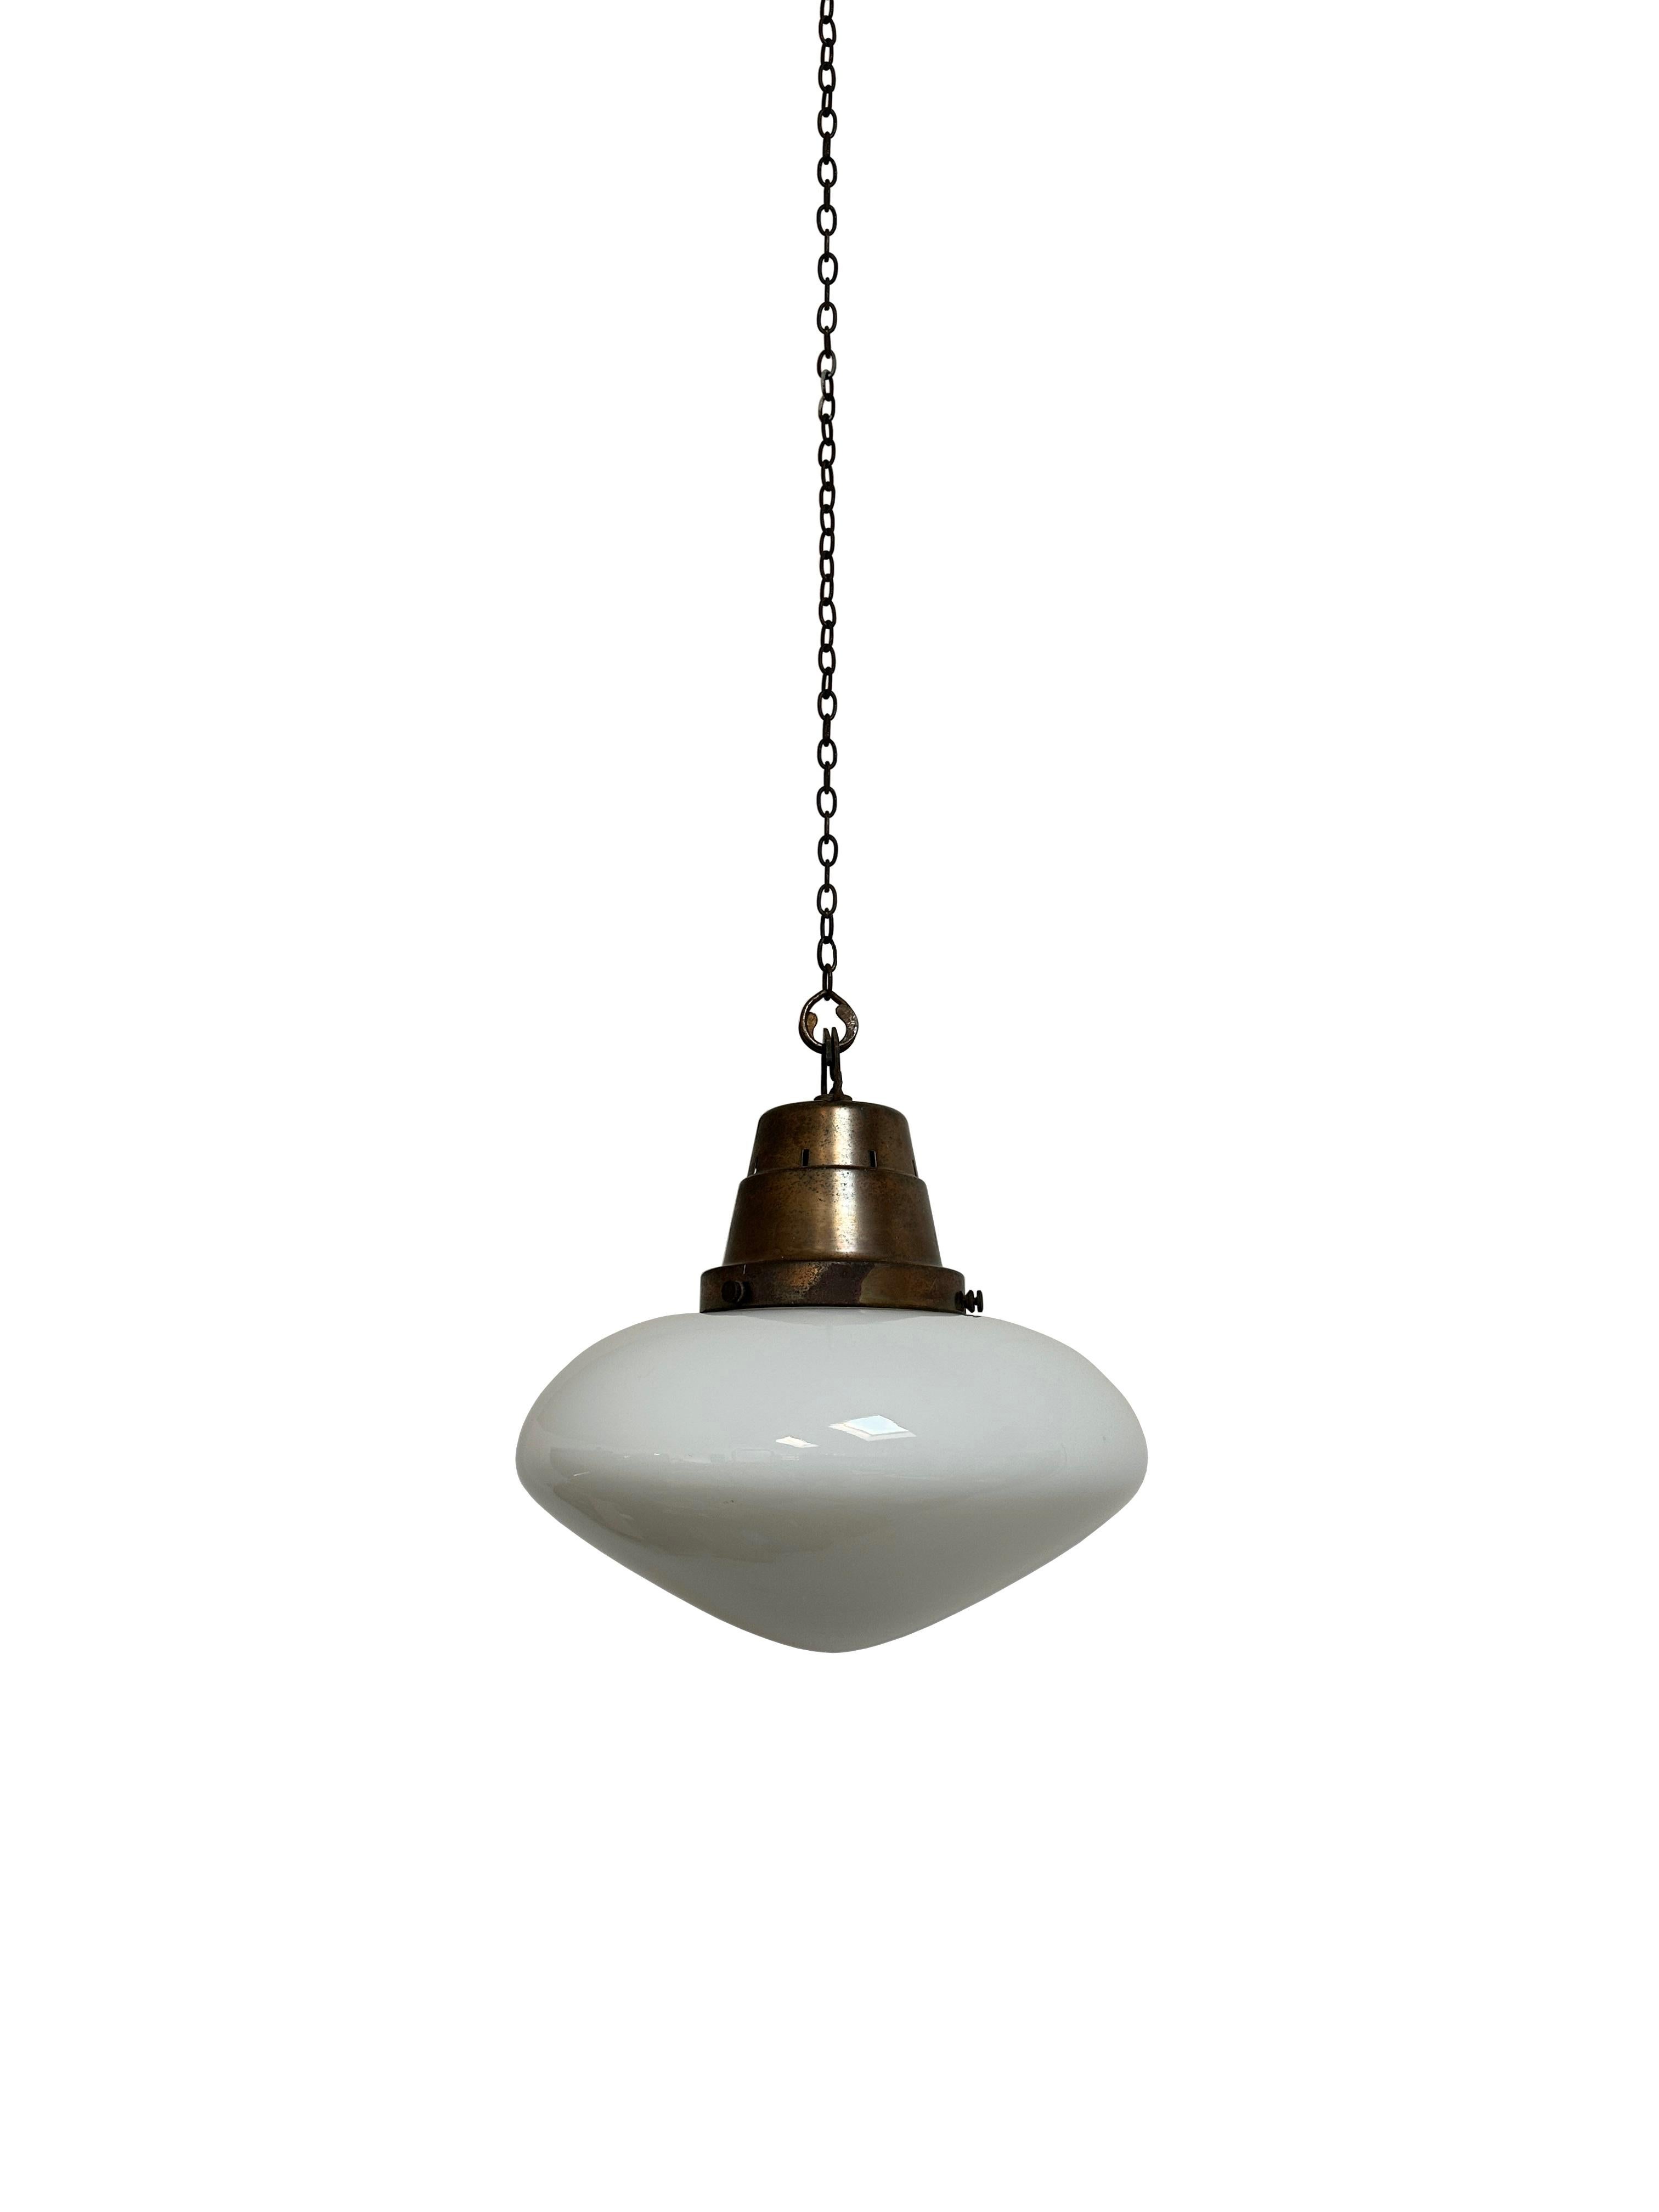 - An oval lid opaline glass pendant light with stepped copper gallery, circa 1930.
- Incredible eye catching shape with beautiful white opaline glass, wear commensurate with age, all in good condition.
- Rewired with dark brown braided flex and